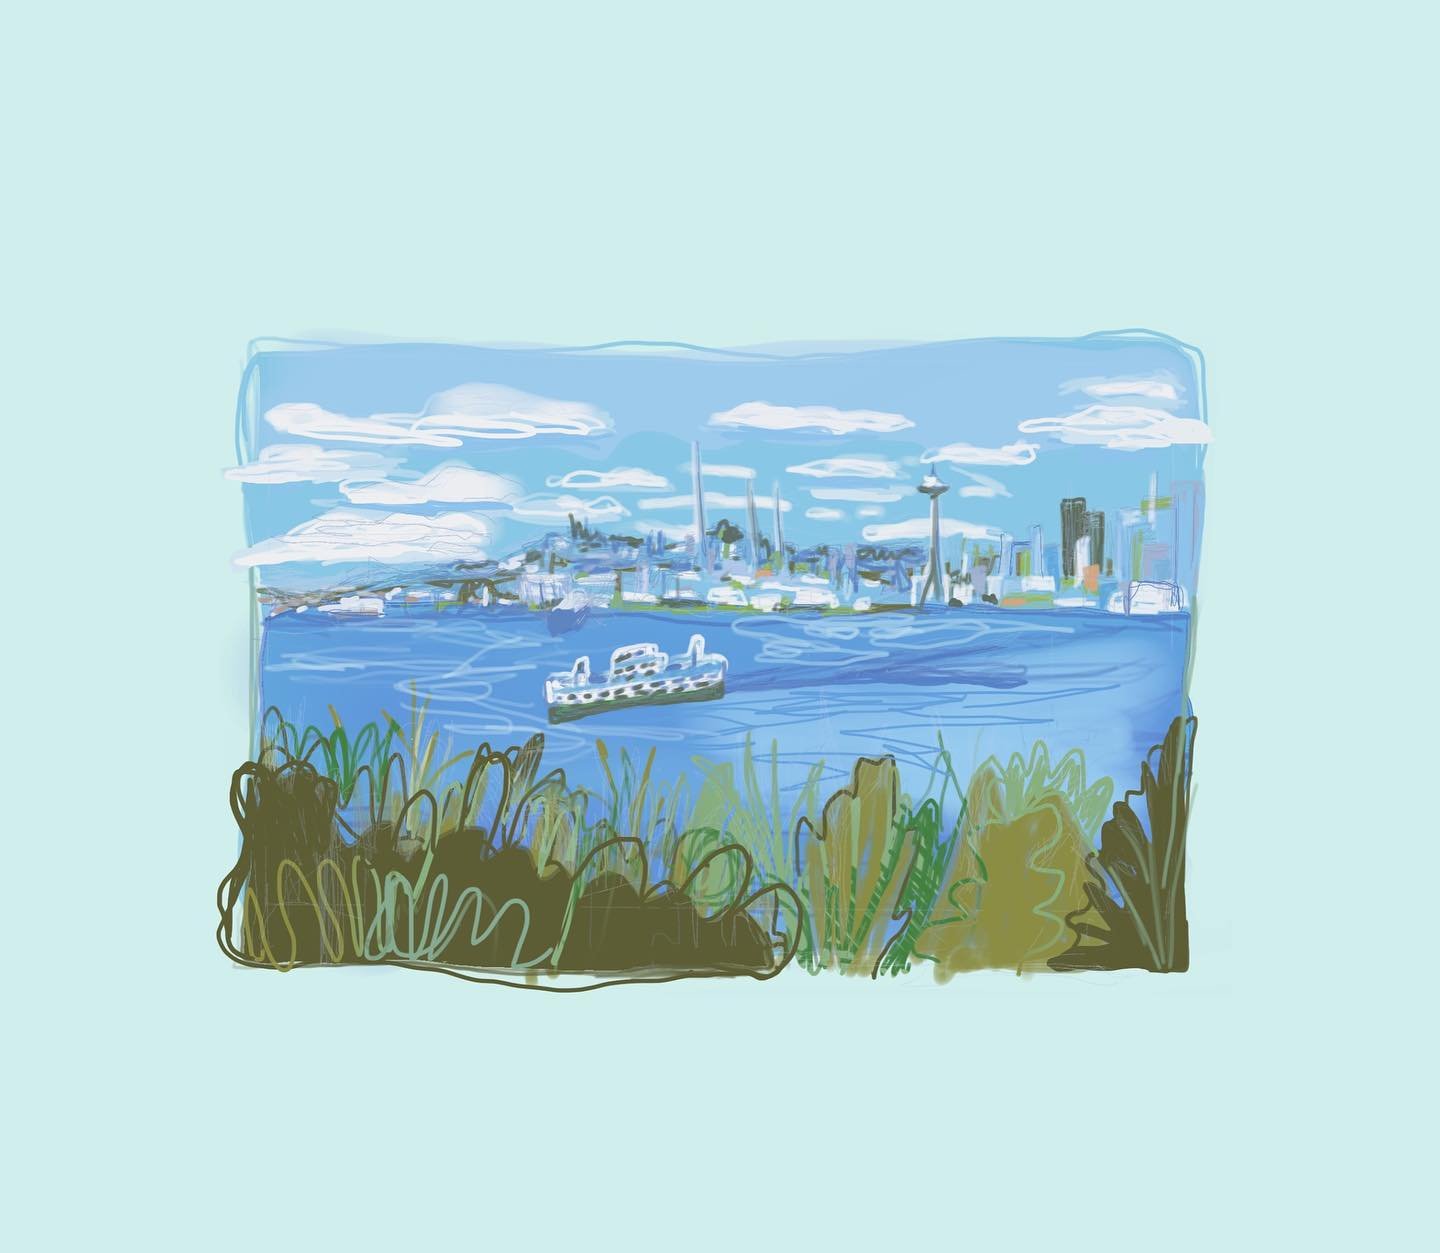 Afternoon At Hamilton Viewpoint. Spring 2024.  Digital illustration. 

I recently enjoyed some gorgeous views Hamilton Viewpoint Park in West Seattle, WA. I watched the ferries and shipping boats float by for a while and enjoyed the skyline. ✨🌲🏙☁️⛴